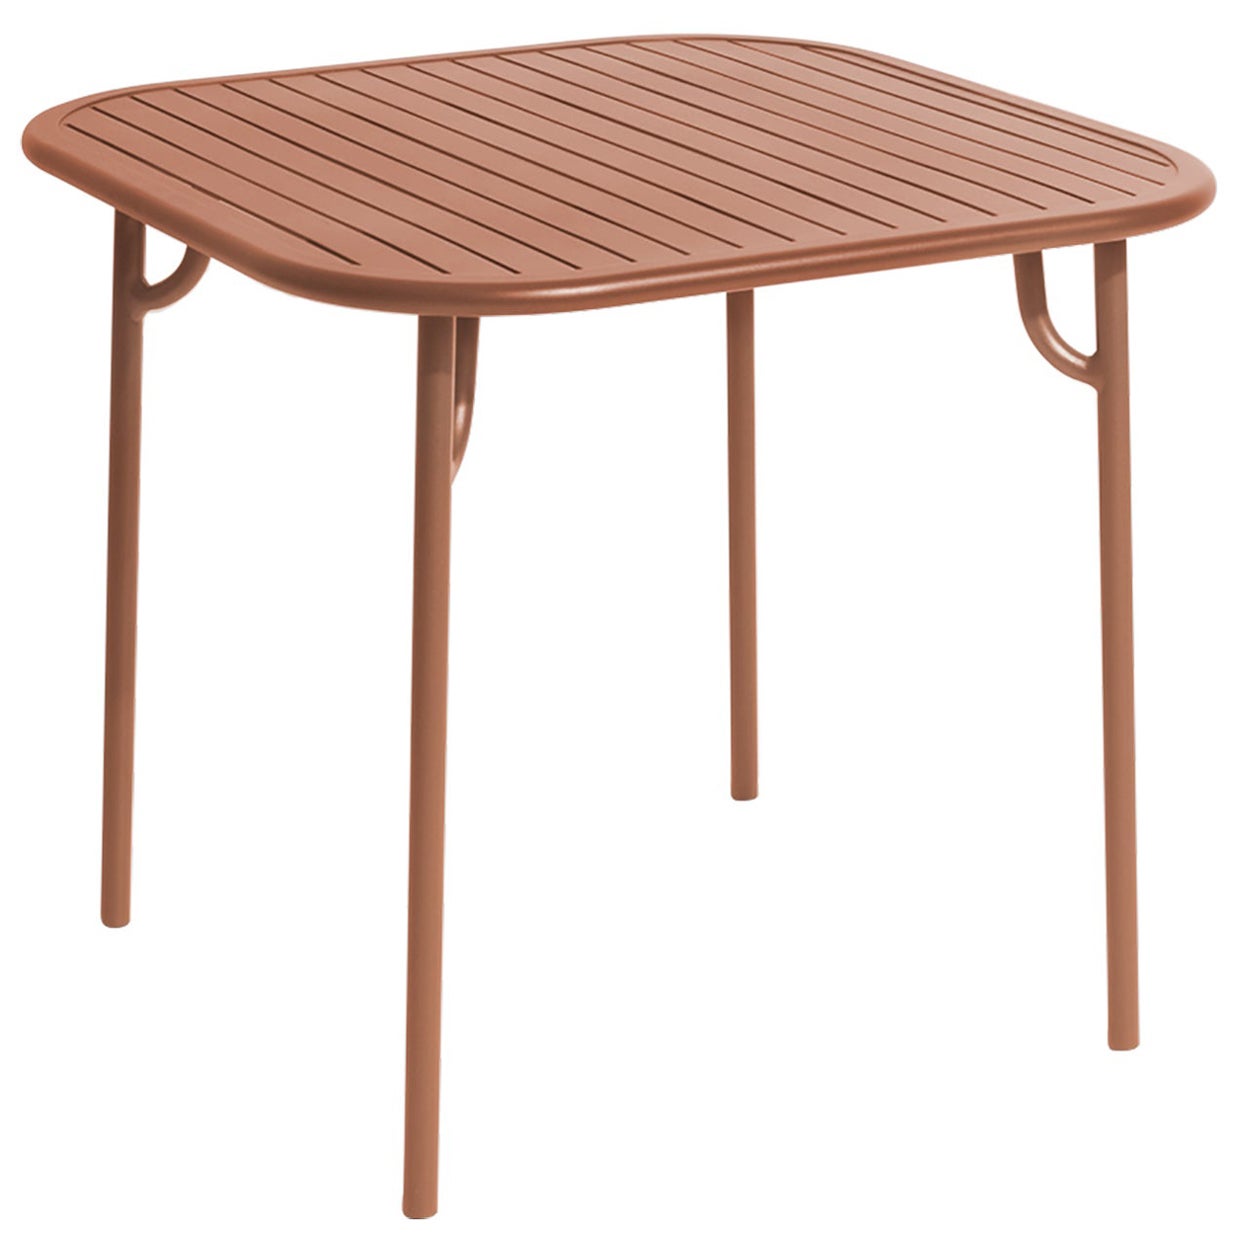 Petite Friture Week-End Square Dining Table in Terracotta Aluminium with Slats For Sale